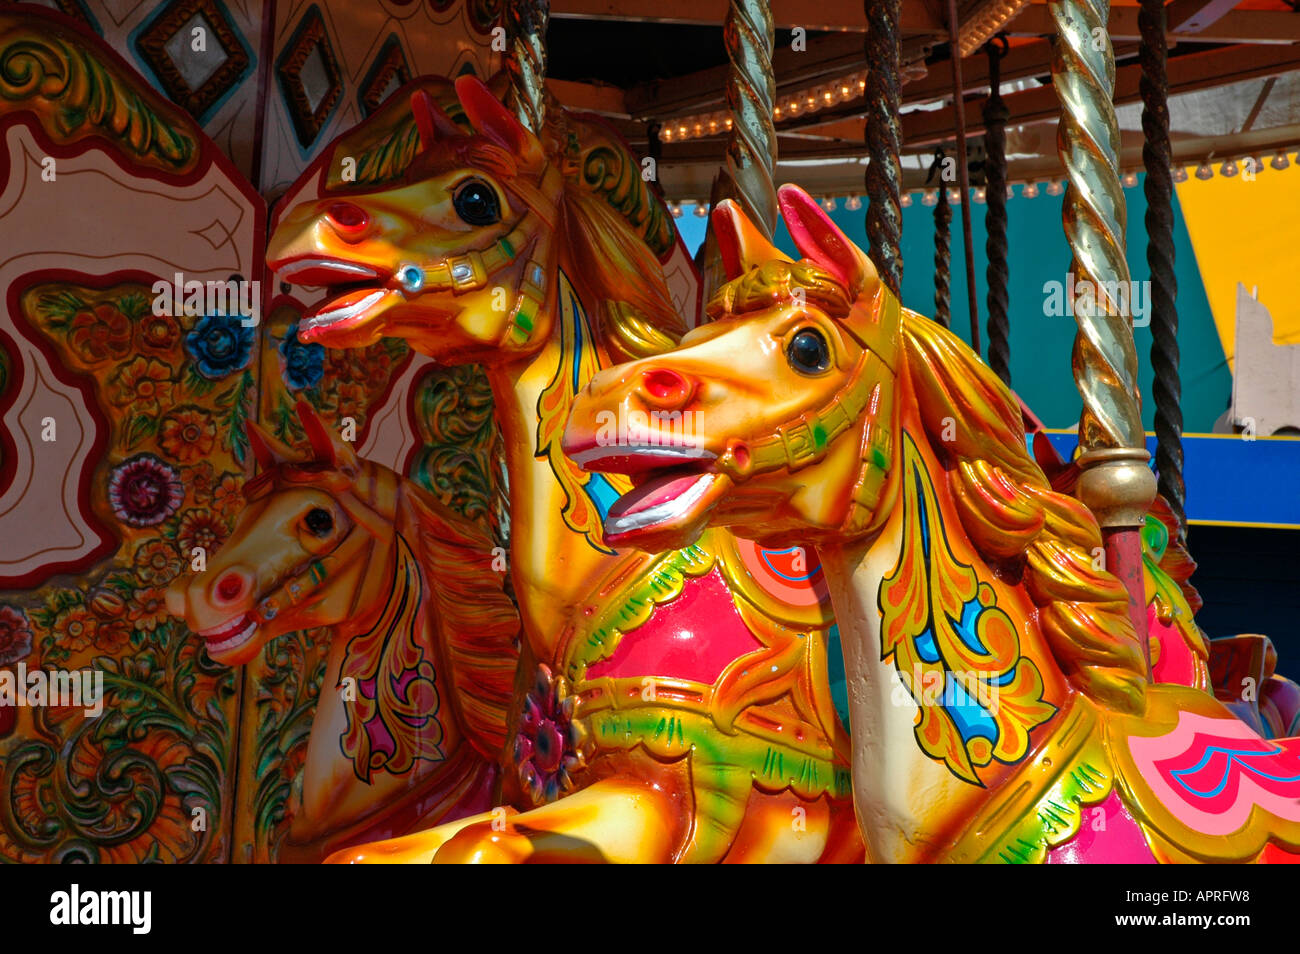 a traditional merry go round fairground ride in southport,england Stock Photo